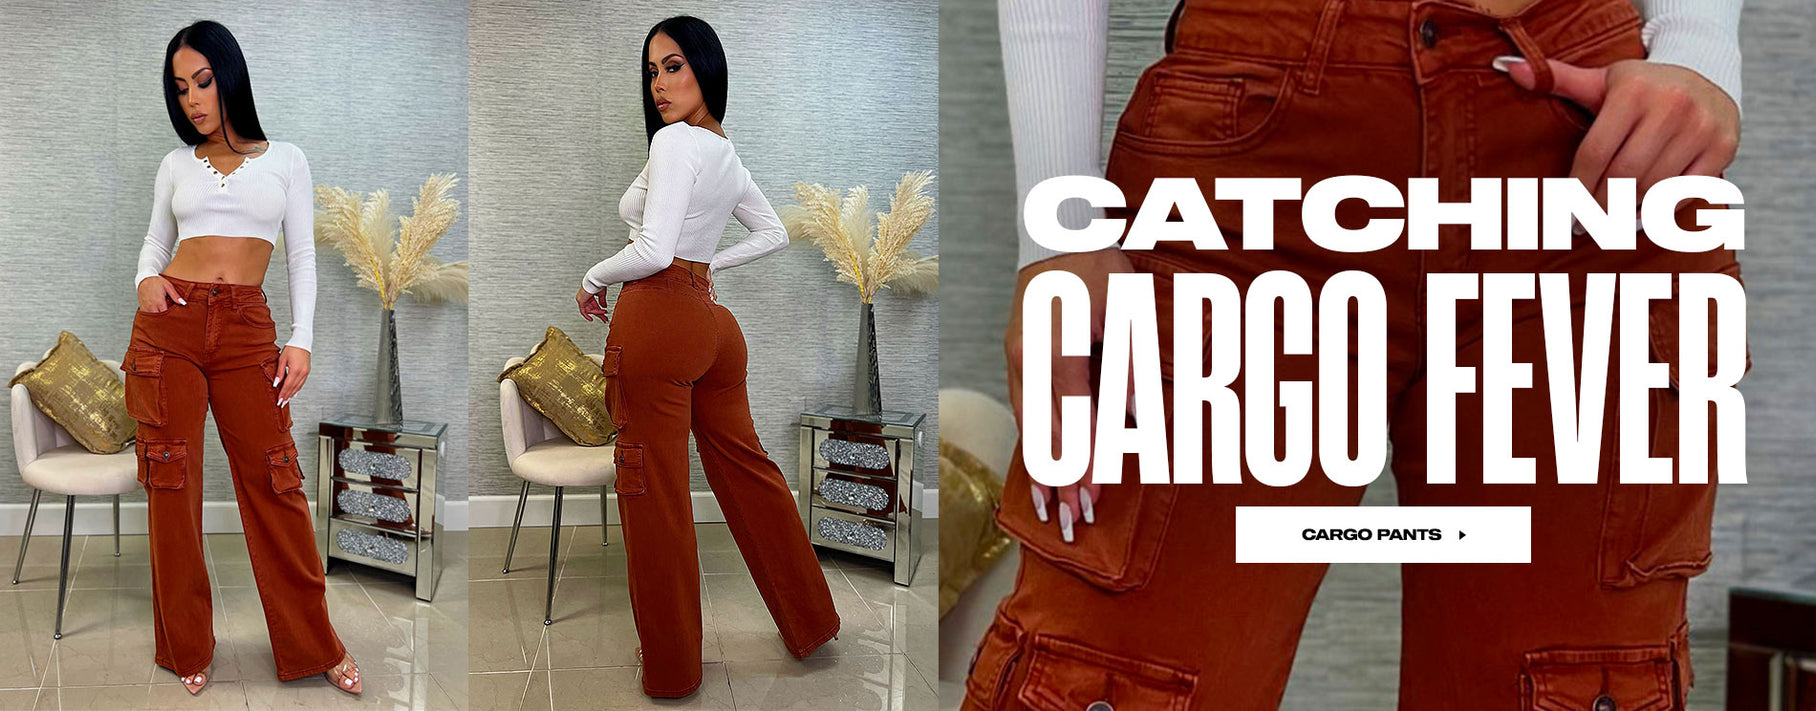 Catching Cargo Fever: Shop New Cargo Pants